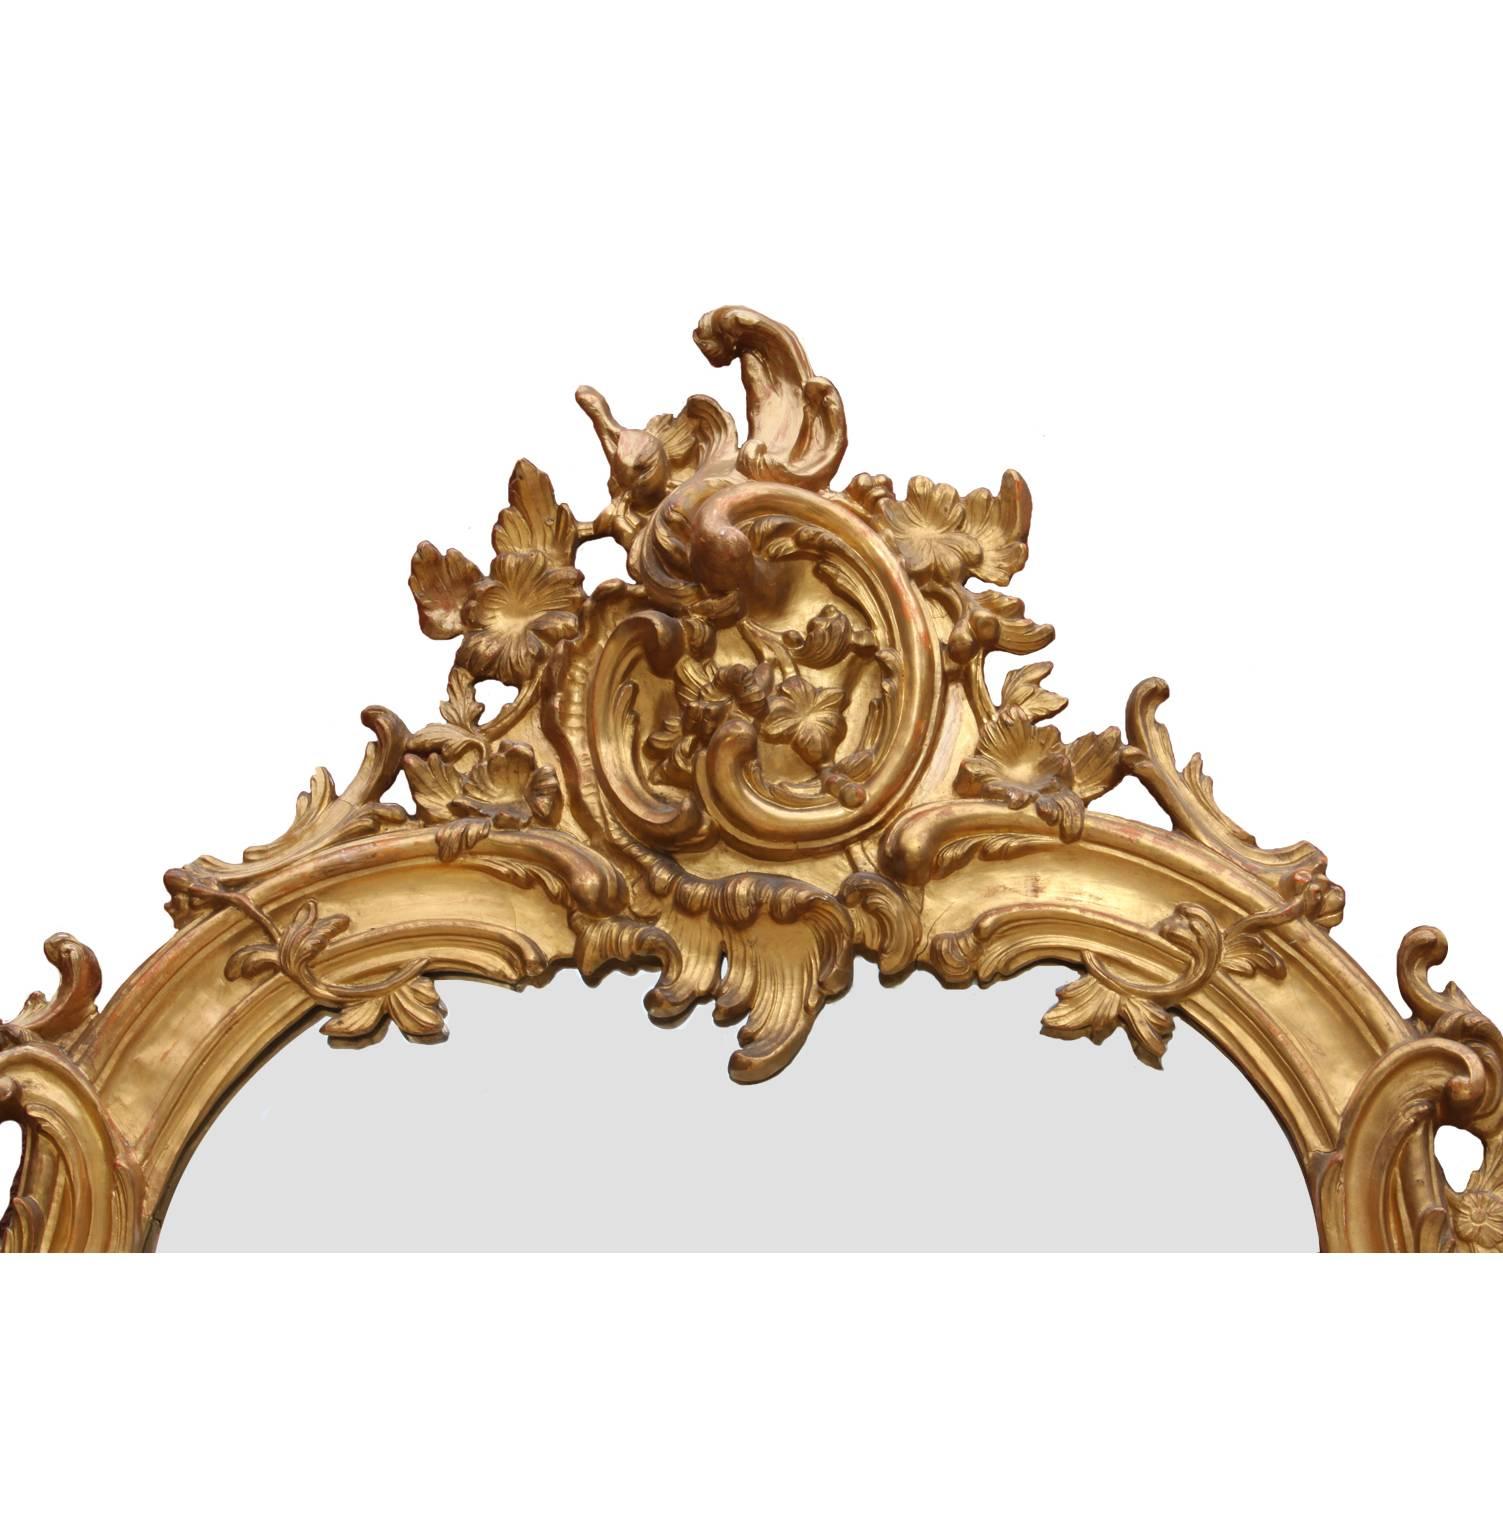 A fine Austrian 19th century Rococo style giltwood carved and Gesso overmantel mirror frame with shelves. The ornately carved floral and scrolled crown centred with a mirror plate and a cone-shaped shelf, all above a three-sectional mirror frame